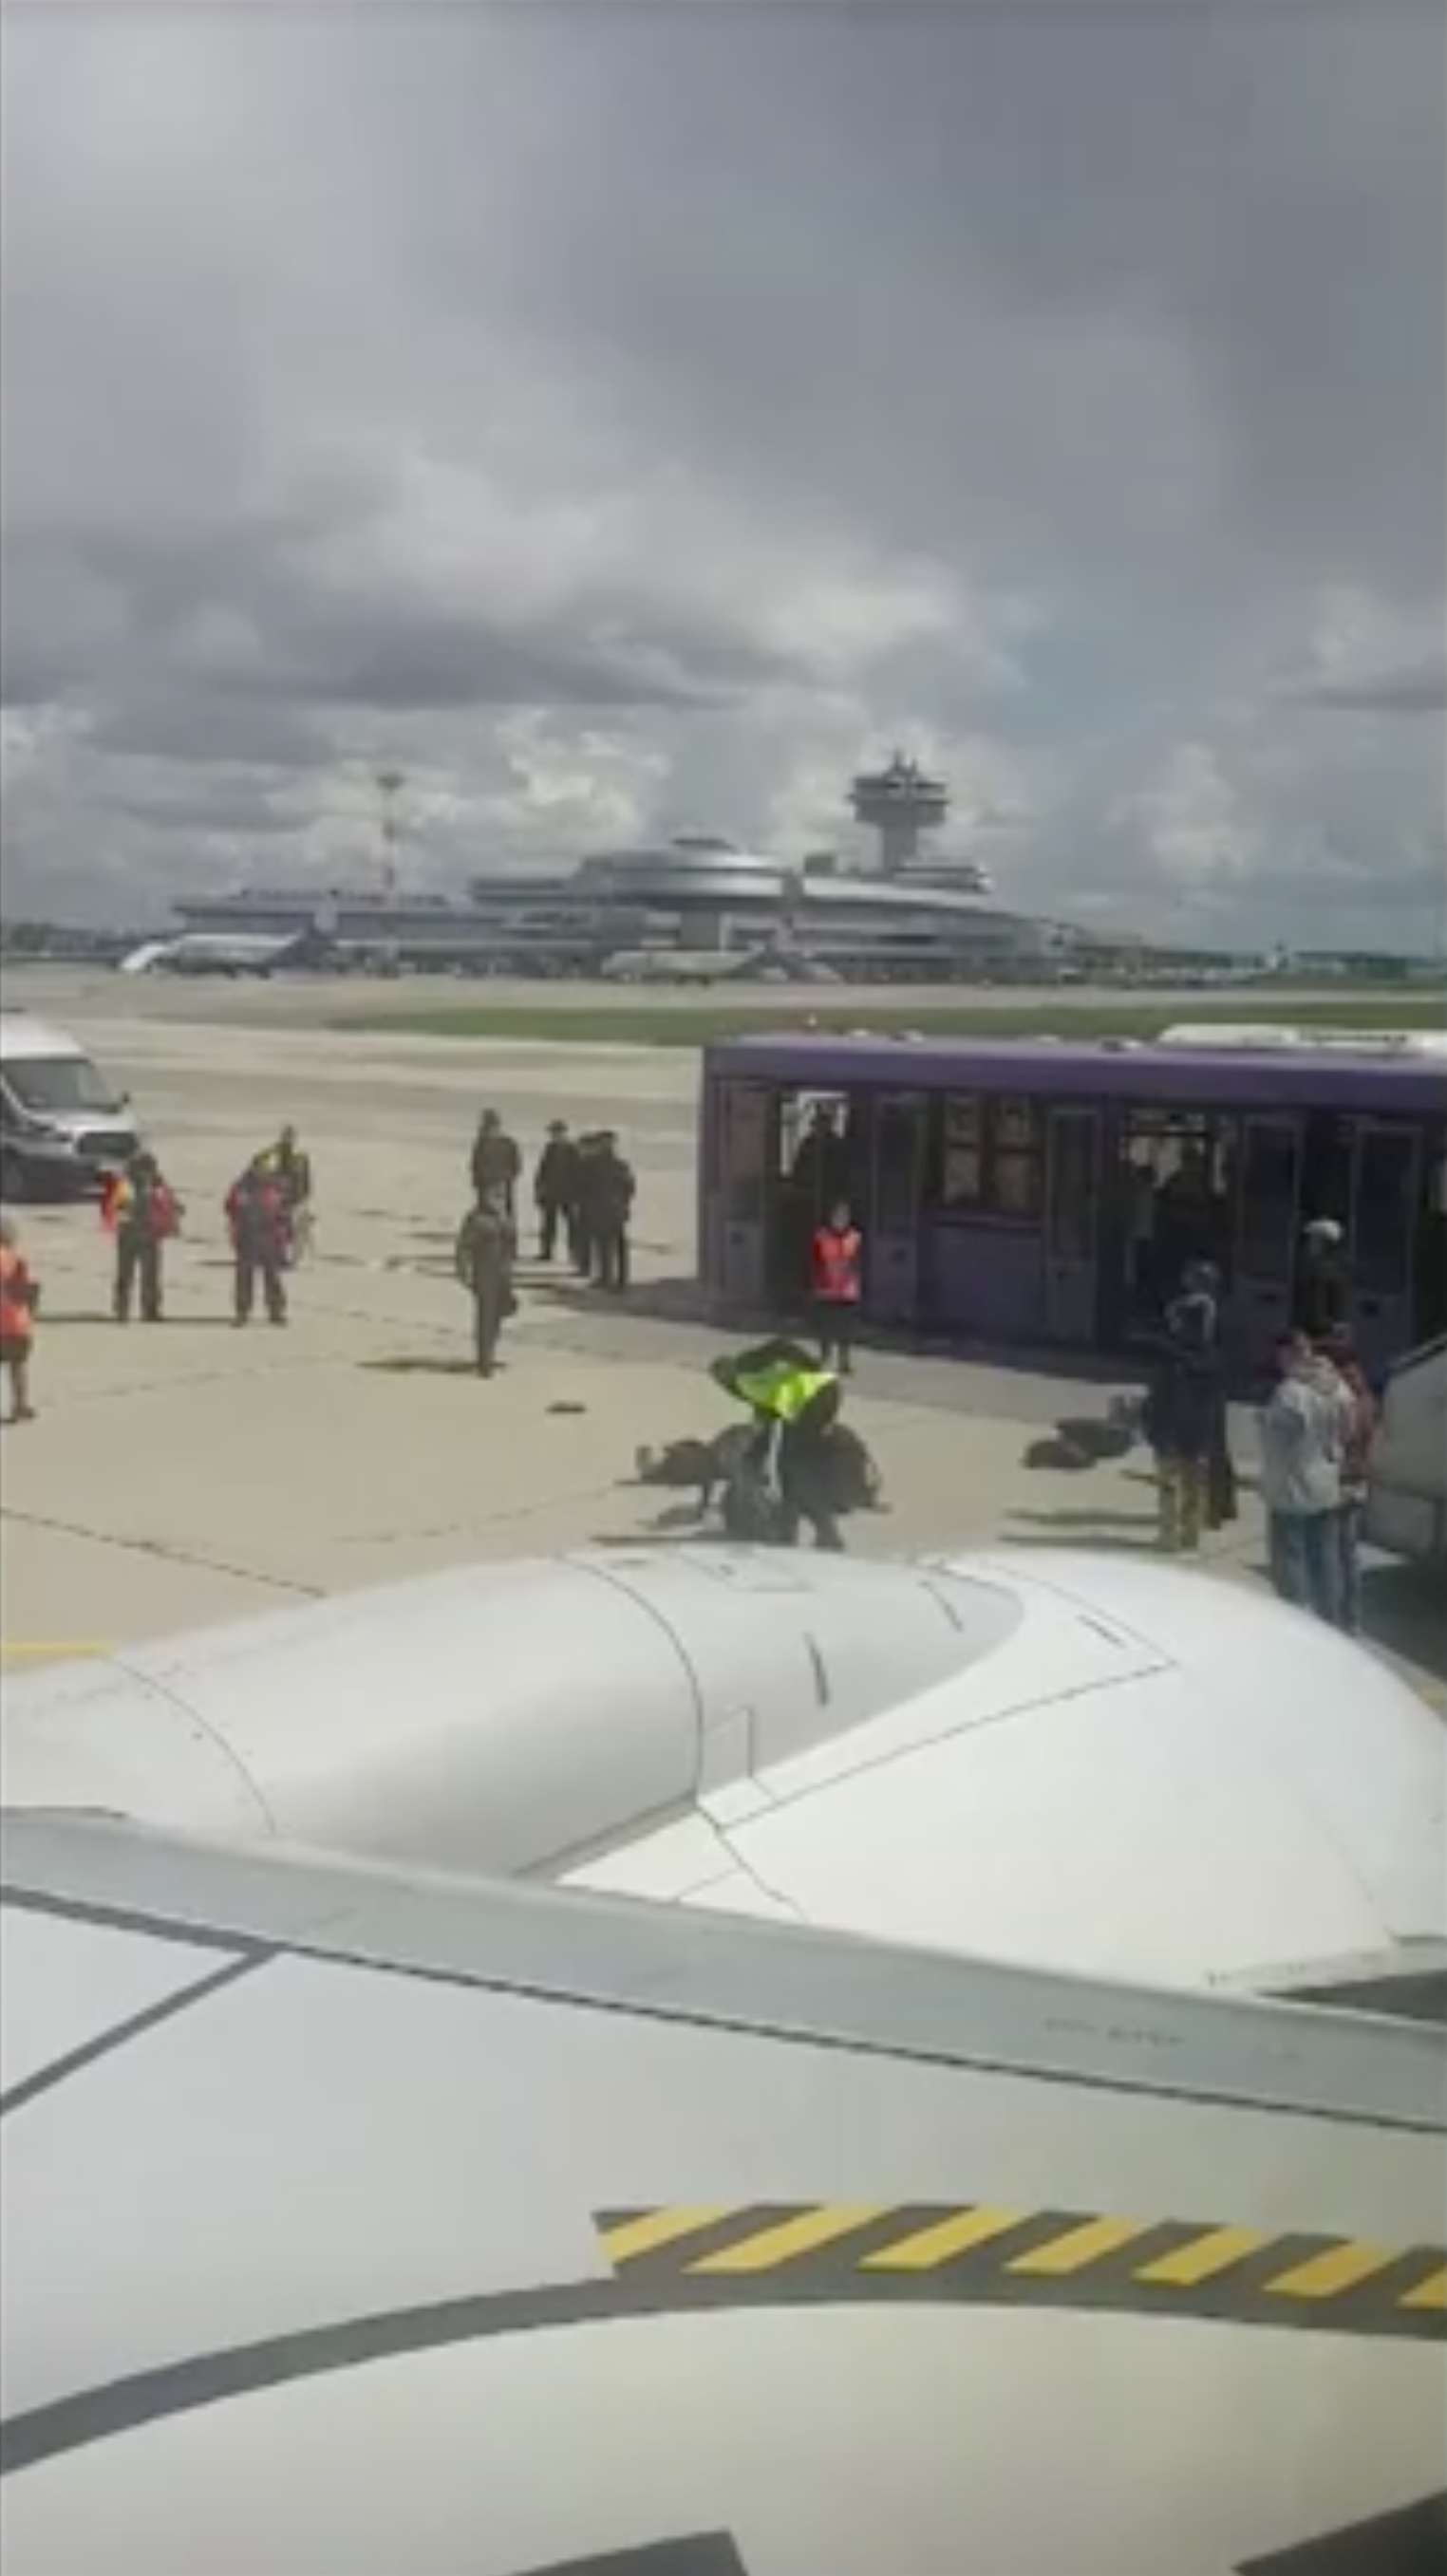 Minsk authorities search luggage of passengers of Ryanair flight which was forced to land in Minsk, Belarus on May 23, 2021 in this still image taken from video